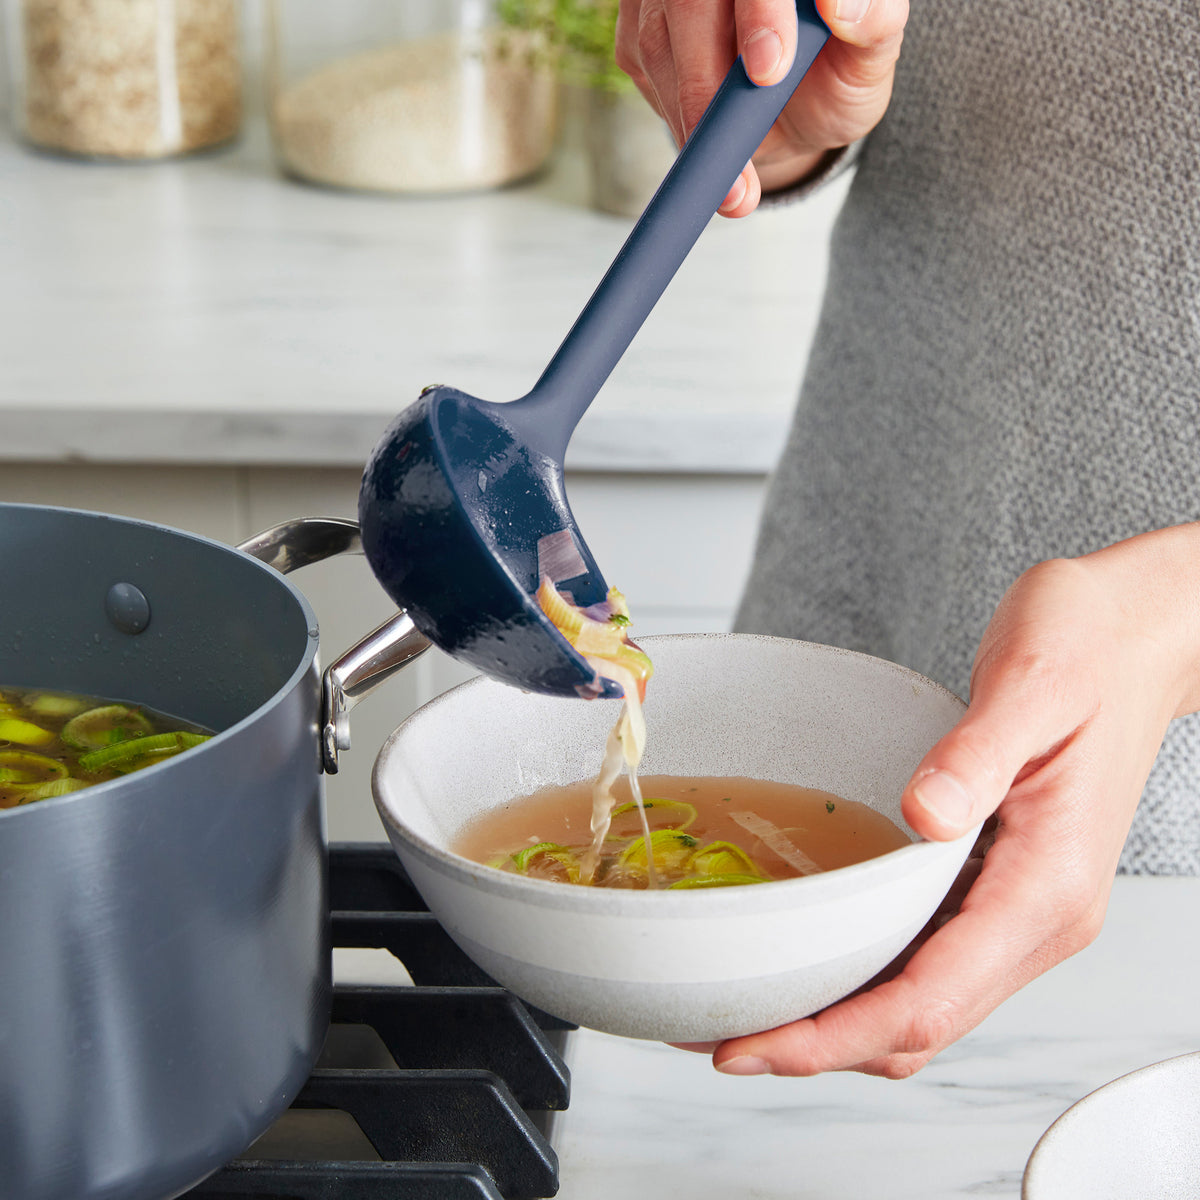 Healthy Non-Toxic PFAS Free Cookware - Platinum Silicone Ladle by GreenPan